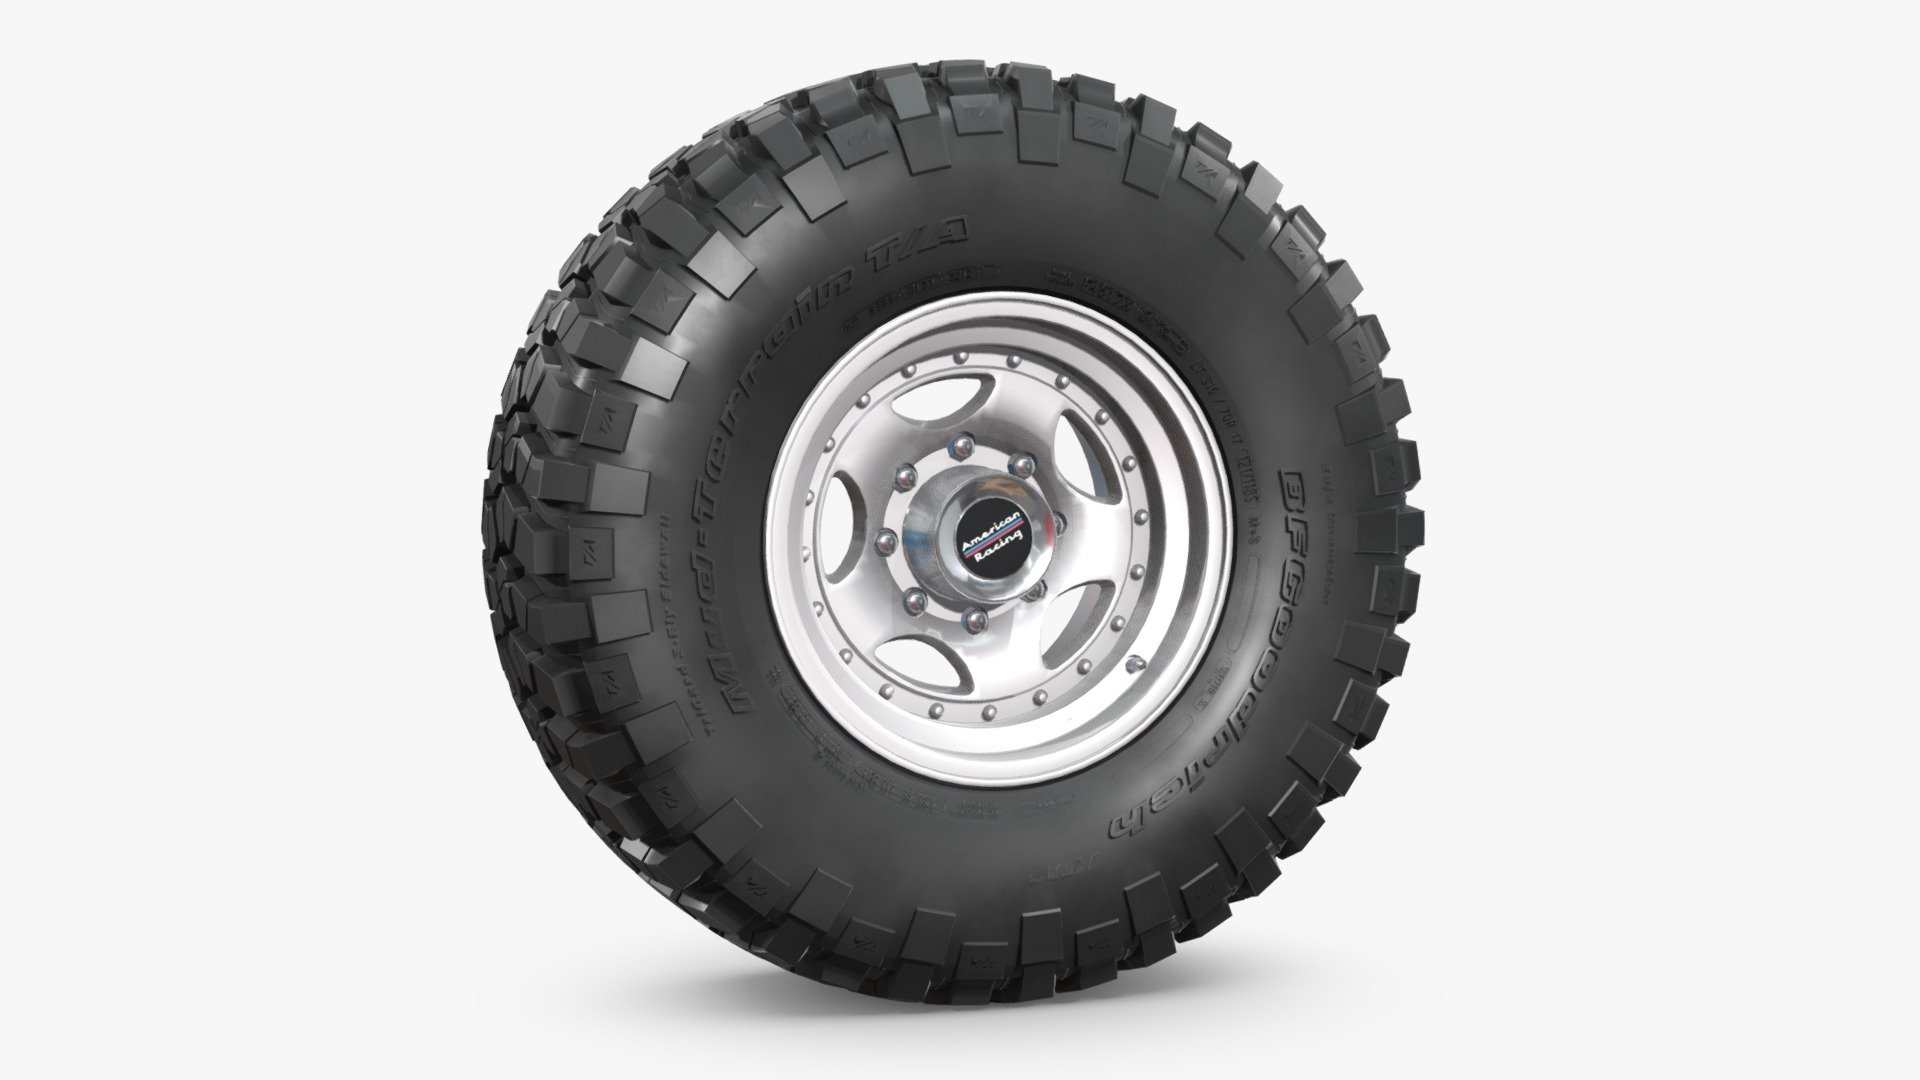 NN 3D store.

3D model of an off road wheel and tire combo.

The model is fully textured and was created with 3DS Max 2016 using the open subdivision modifier which has been left in the stack to adjust the level of detail.

There are also included a Blender format with textures.

Exchange files included: 3DS, FBX and OBJ.

SPECIFICATIONS:

The model has 60.250 polygons.

Scale/transform is set to 100%, units are set to centimeters, texture paths are stripped and and it is made to real world scale.

PRESENTATION:

Product is ready to render out of the box only in 3DSMax.

Lights and cameras are not included.

MATERIALS AND TEXTURES:

All textures are included and mapped in all files but they will render like the preview images only in 3DSMax with V-Ray, the rest of the files might have to be adjusted depending on the software you are using.

JPG textures have 2048 x 2048 resolution 3d model